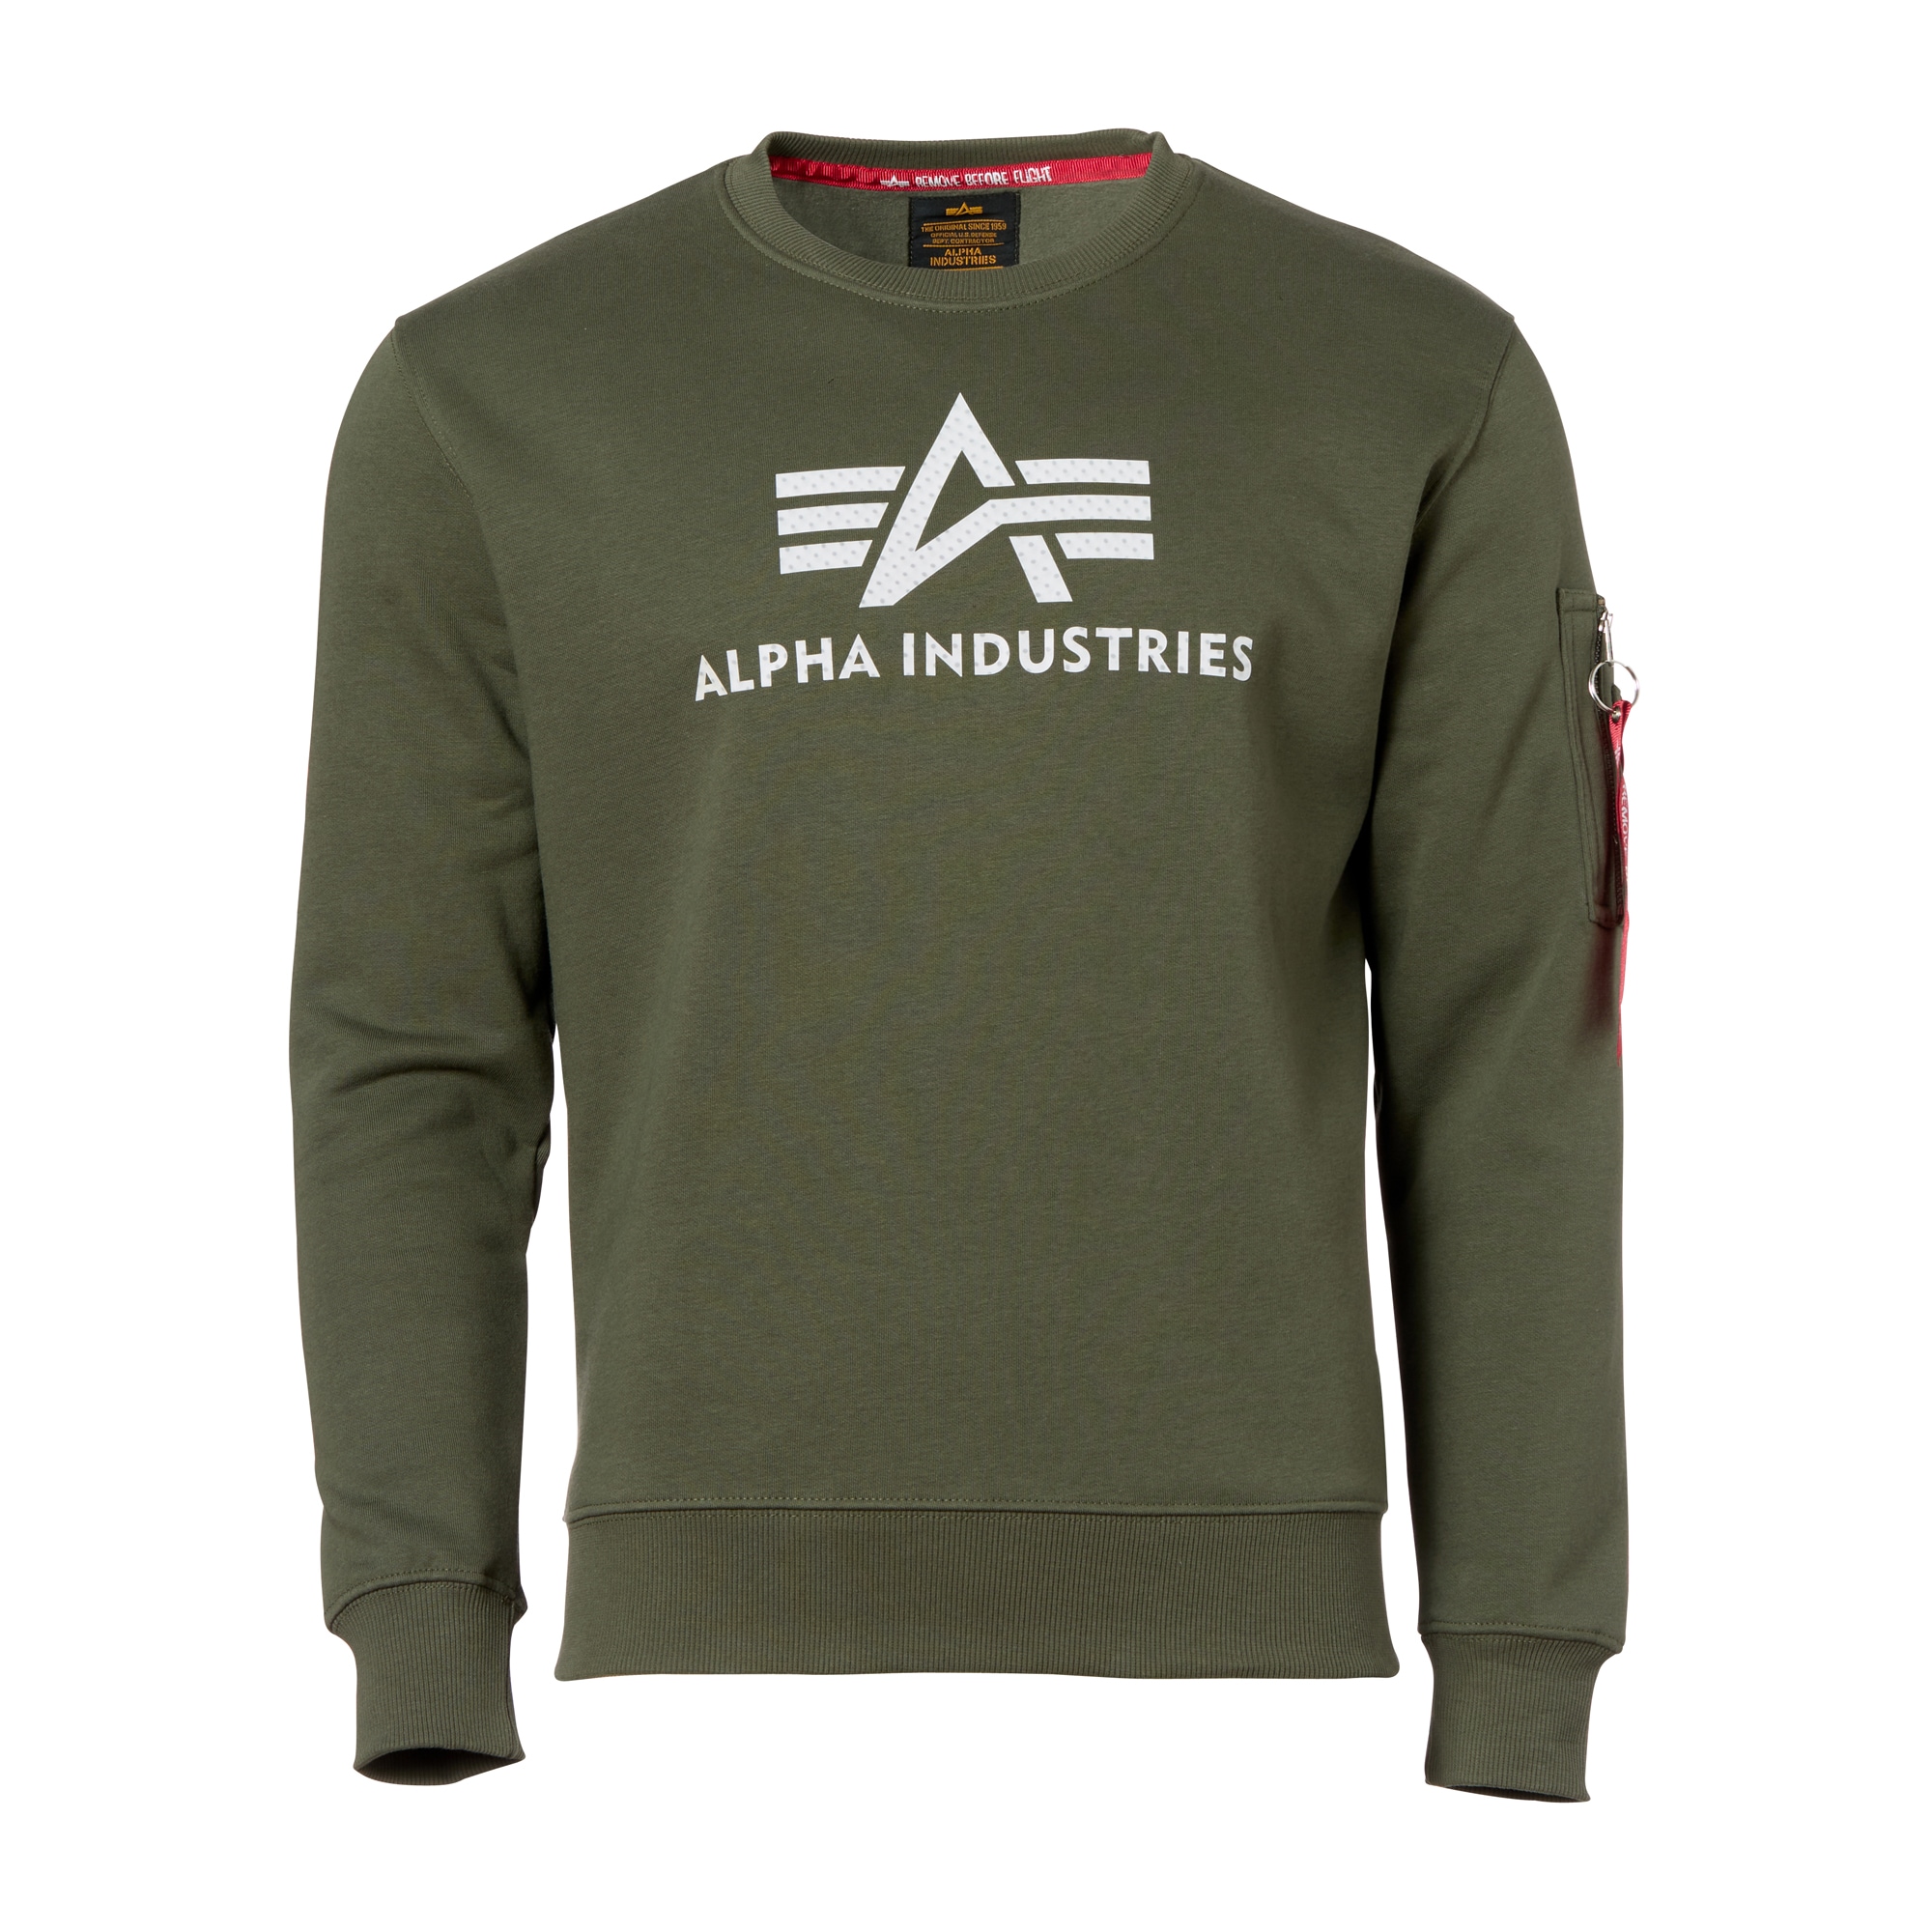 3D Purchase II Pullover Alpha o Sweater Industries dark Logo the